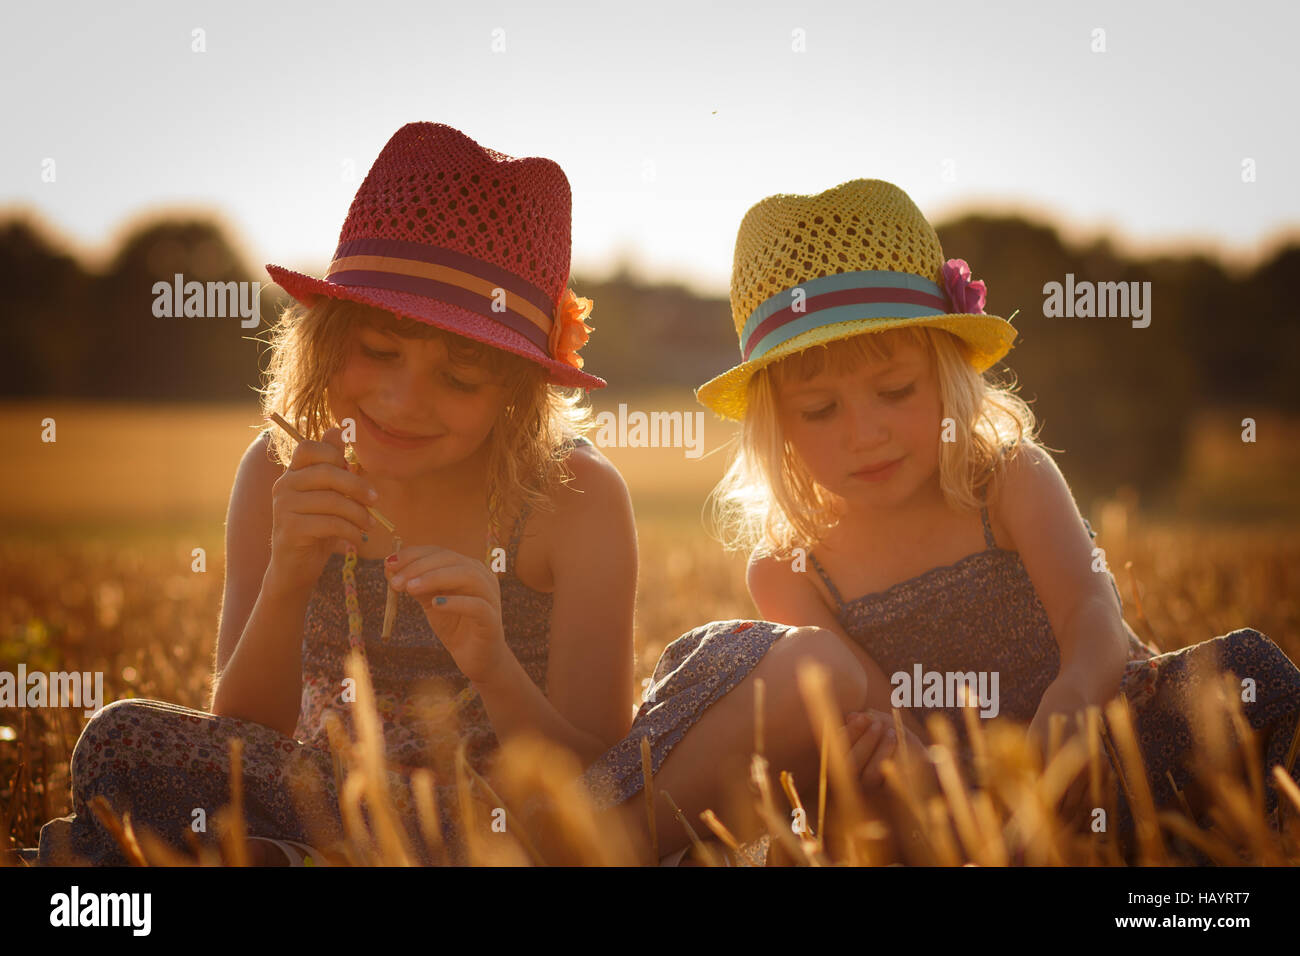 Two young girls playing in a cornfield Stock Photo